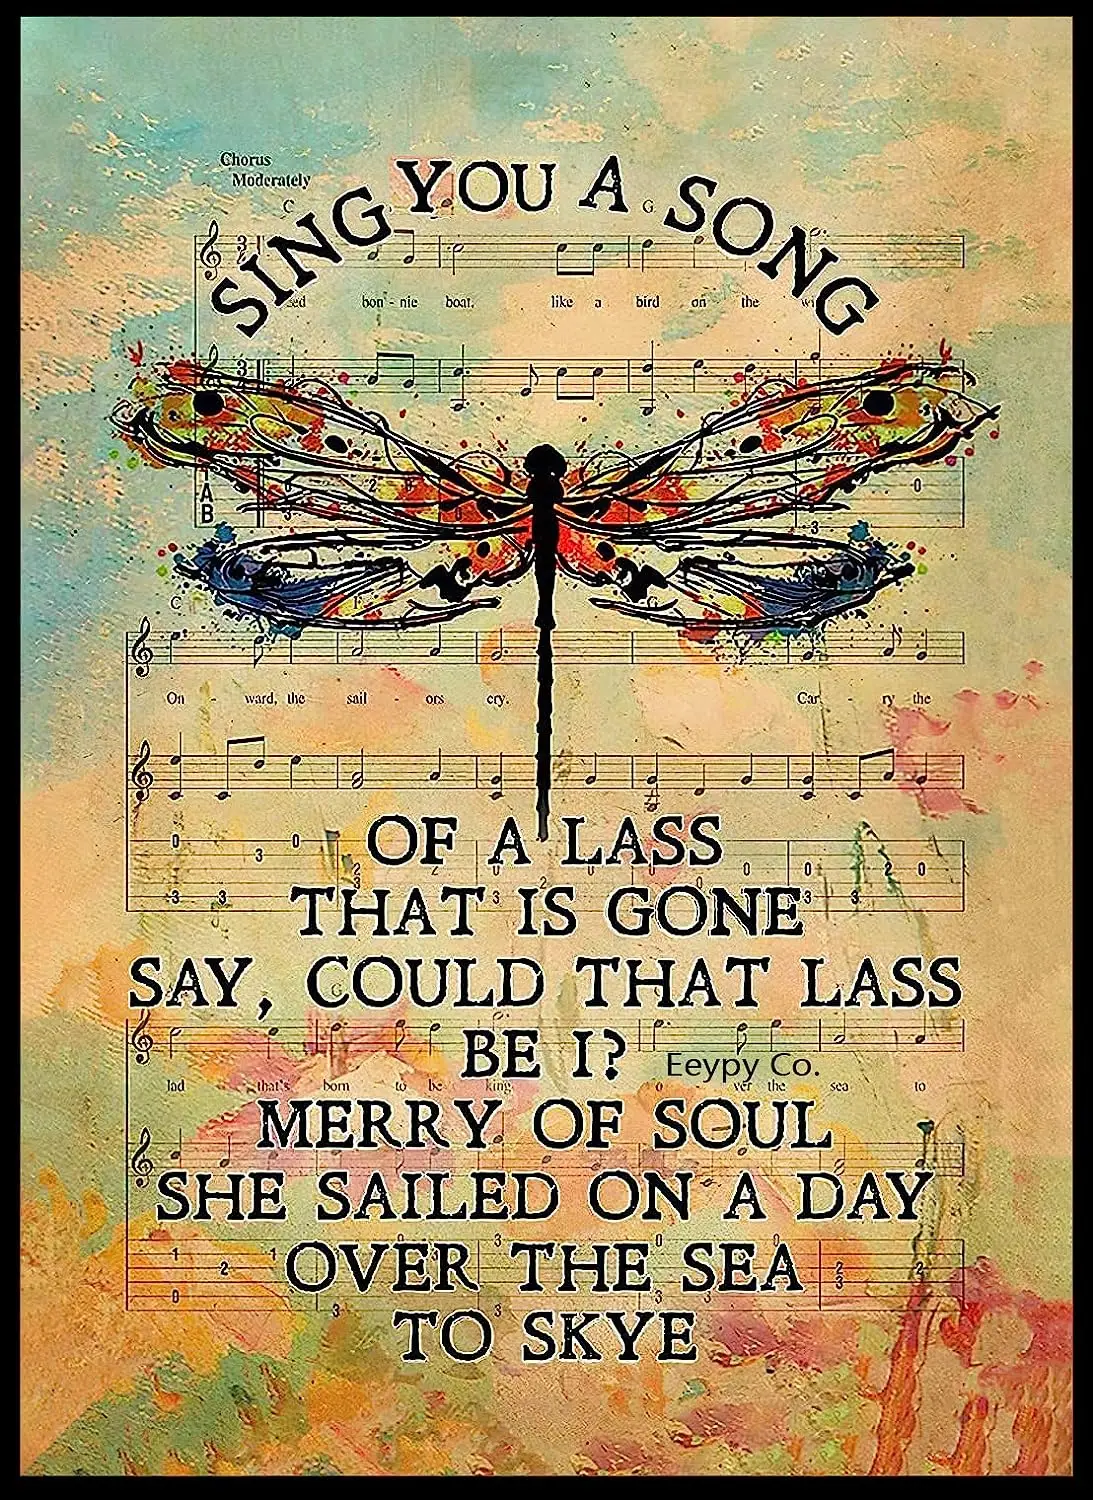 

Tin Sign Vintage Skye Boat Song for Fan Outlander Sing You A Song of A Lass Hippie Dragonfly Unframed Metal Sign, Most